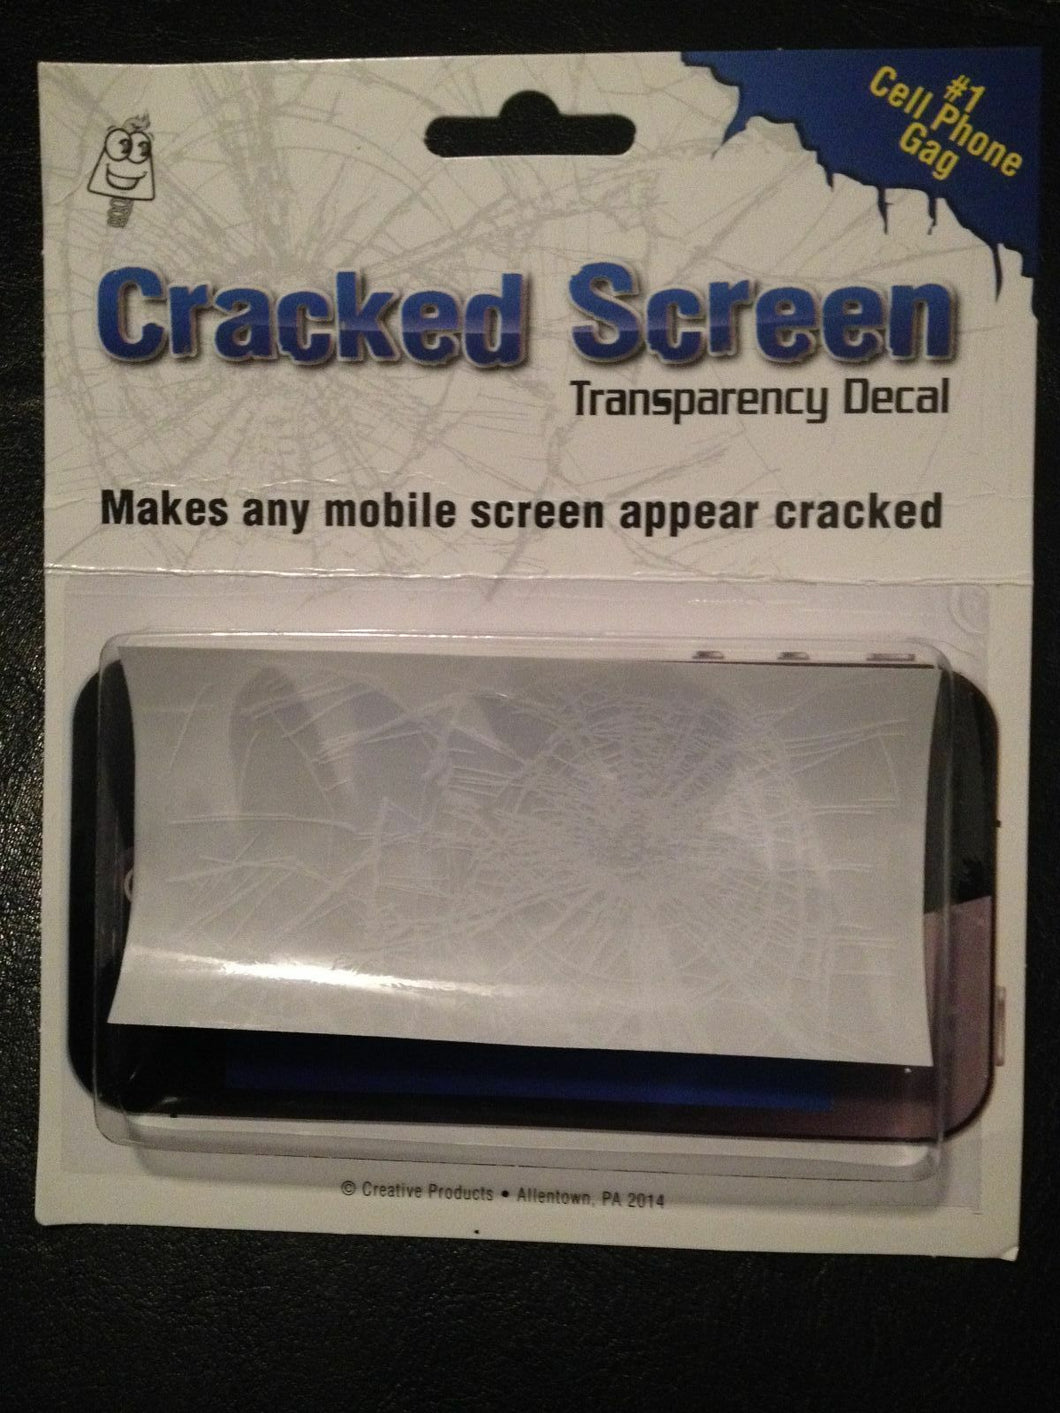 Cracked Screen - Transparency Decal To Make Mobile Phone Screens Appear Cracked!